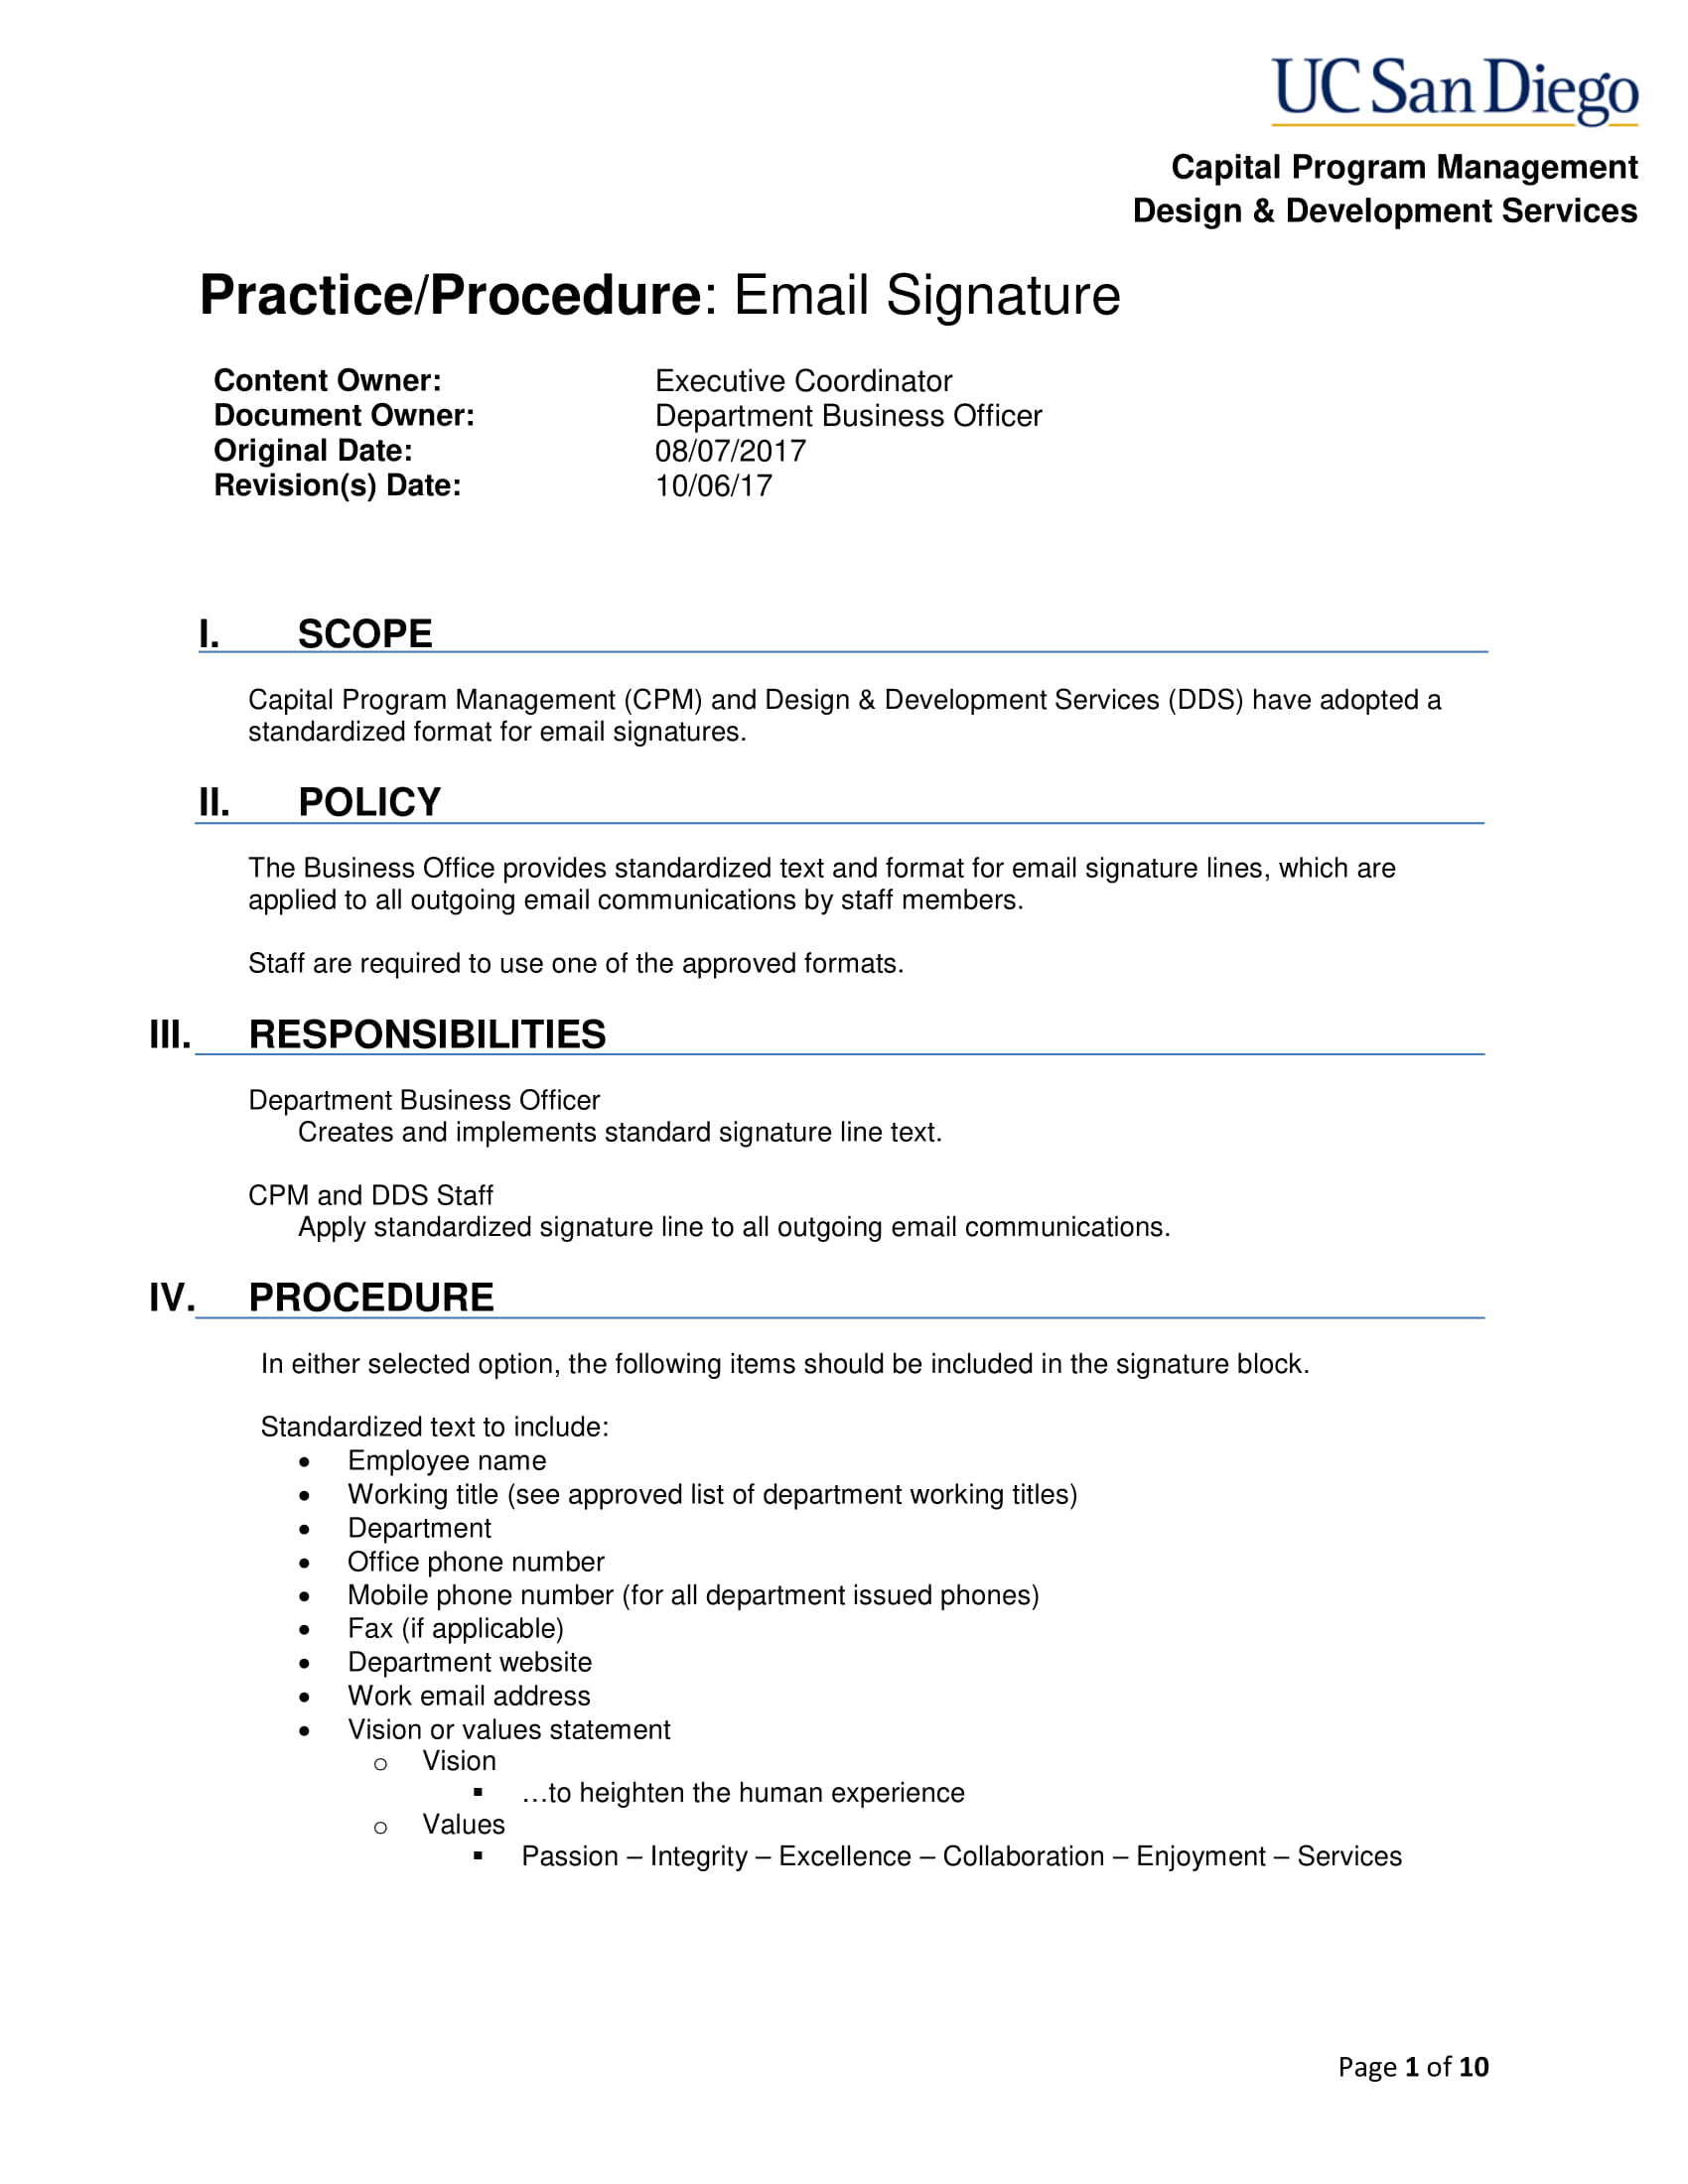 email signature policy and practice example 01